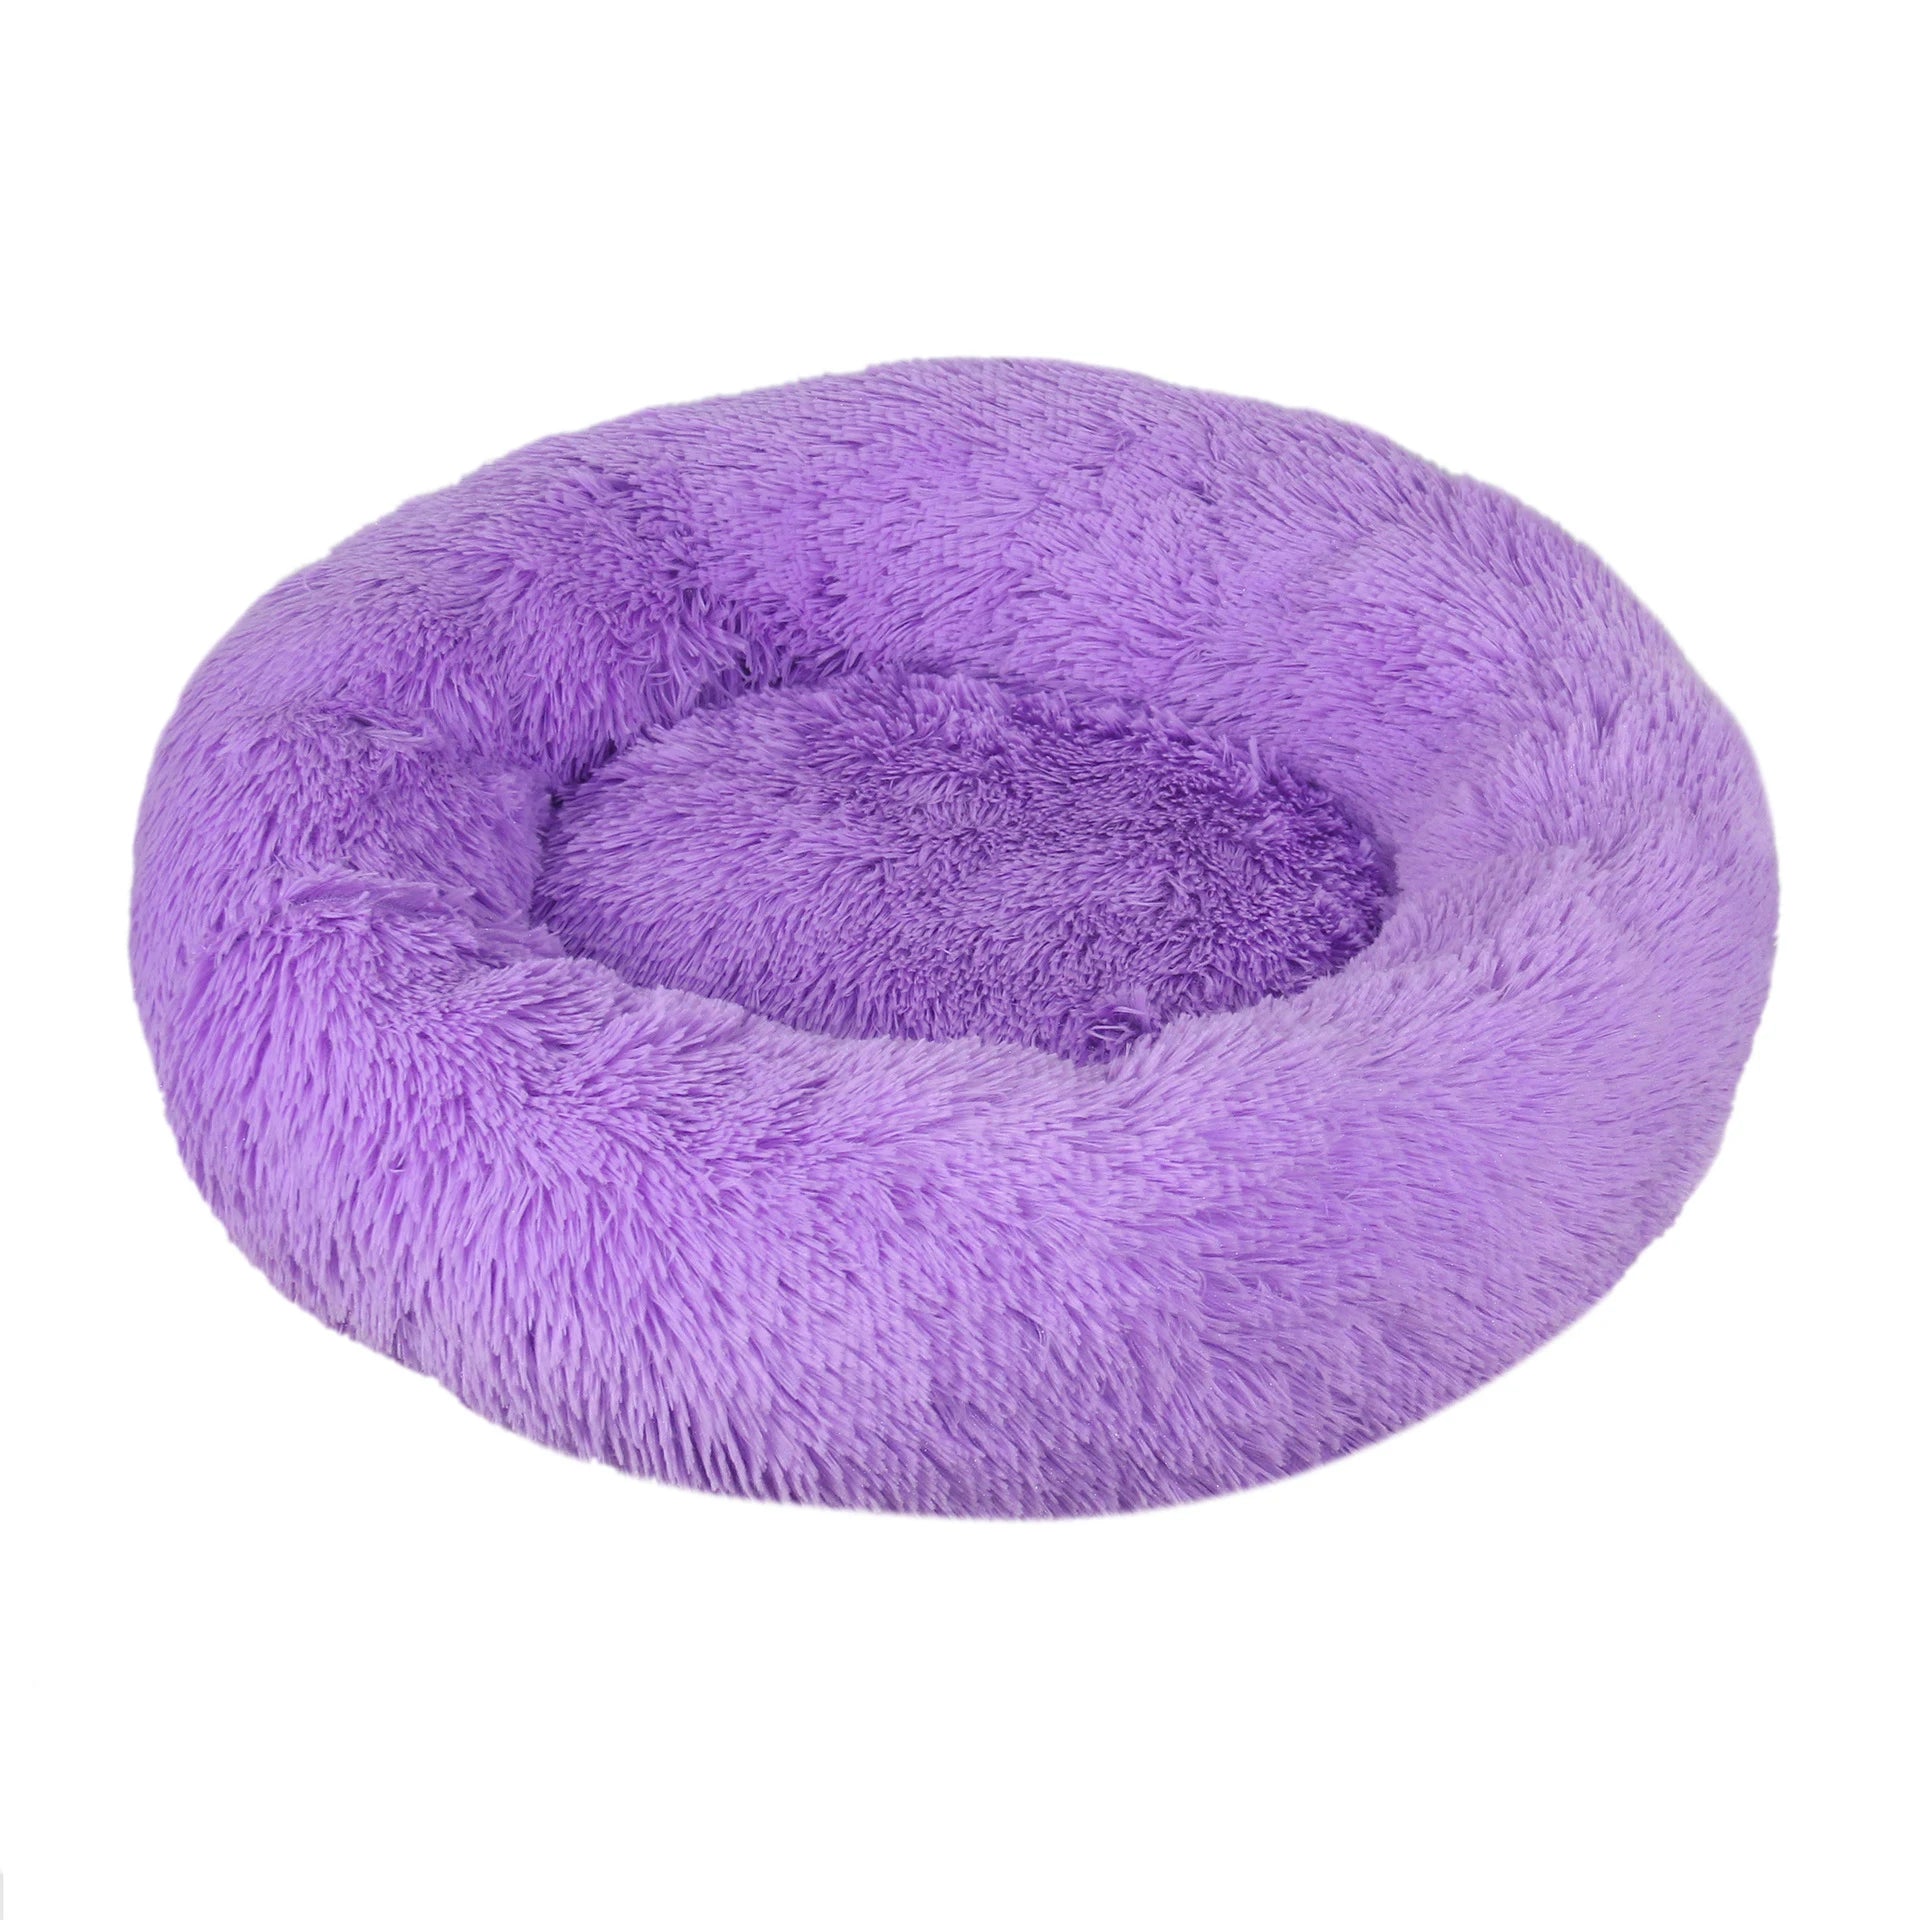 A purple plush dog bed shaped like a donut, offering a comfortable and secure space for small dogs to curl up and relax.